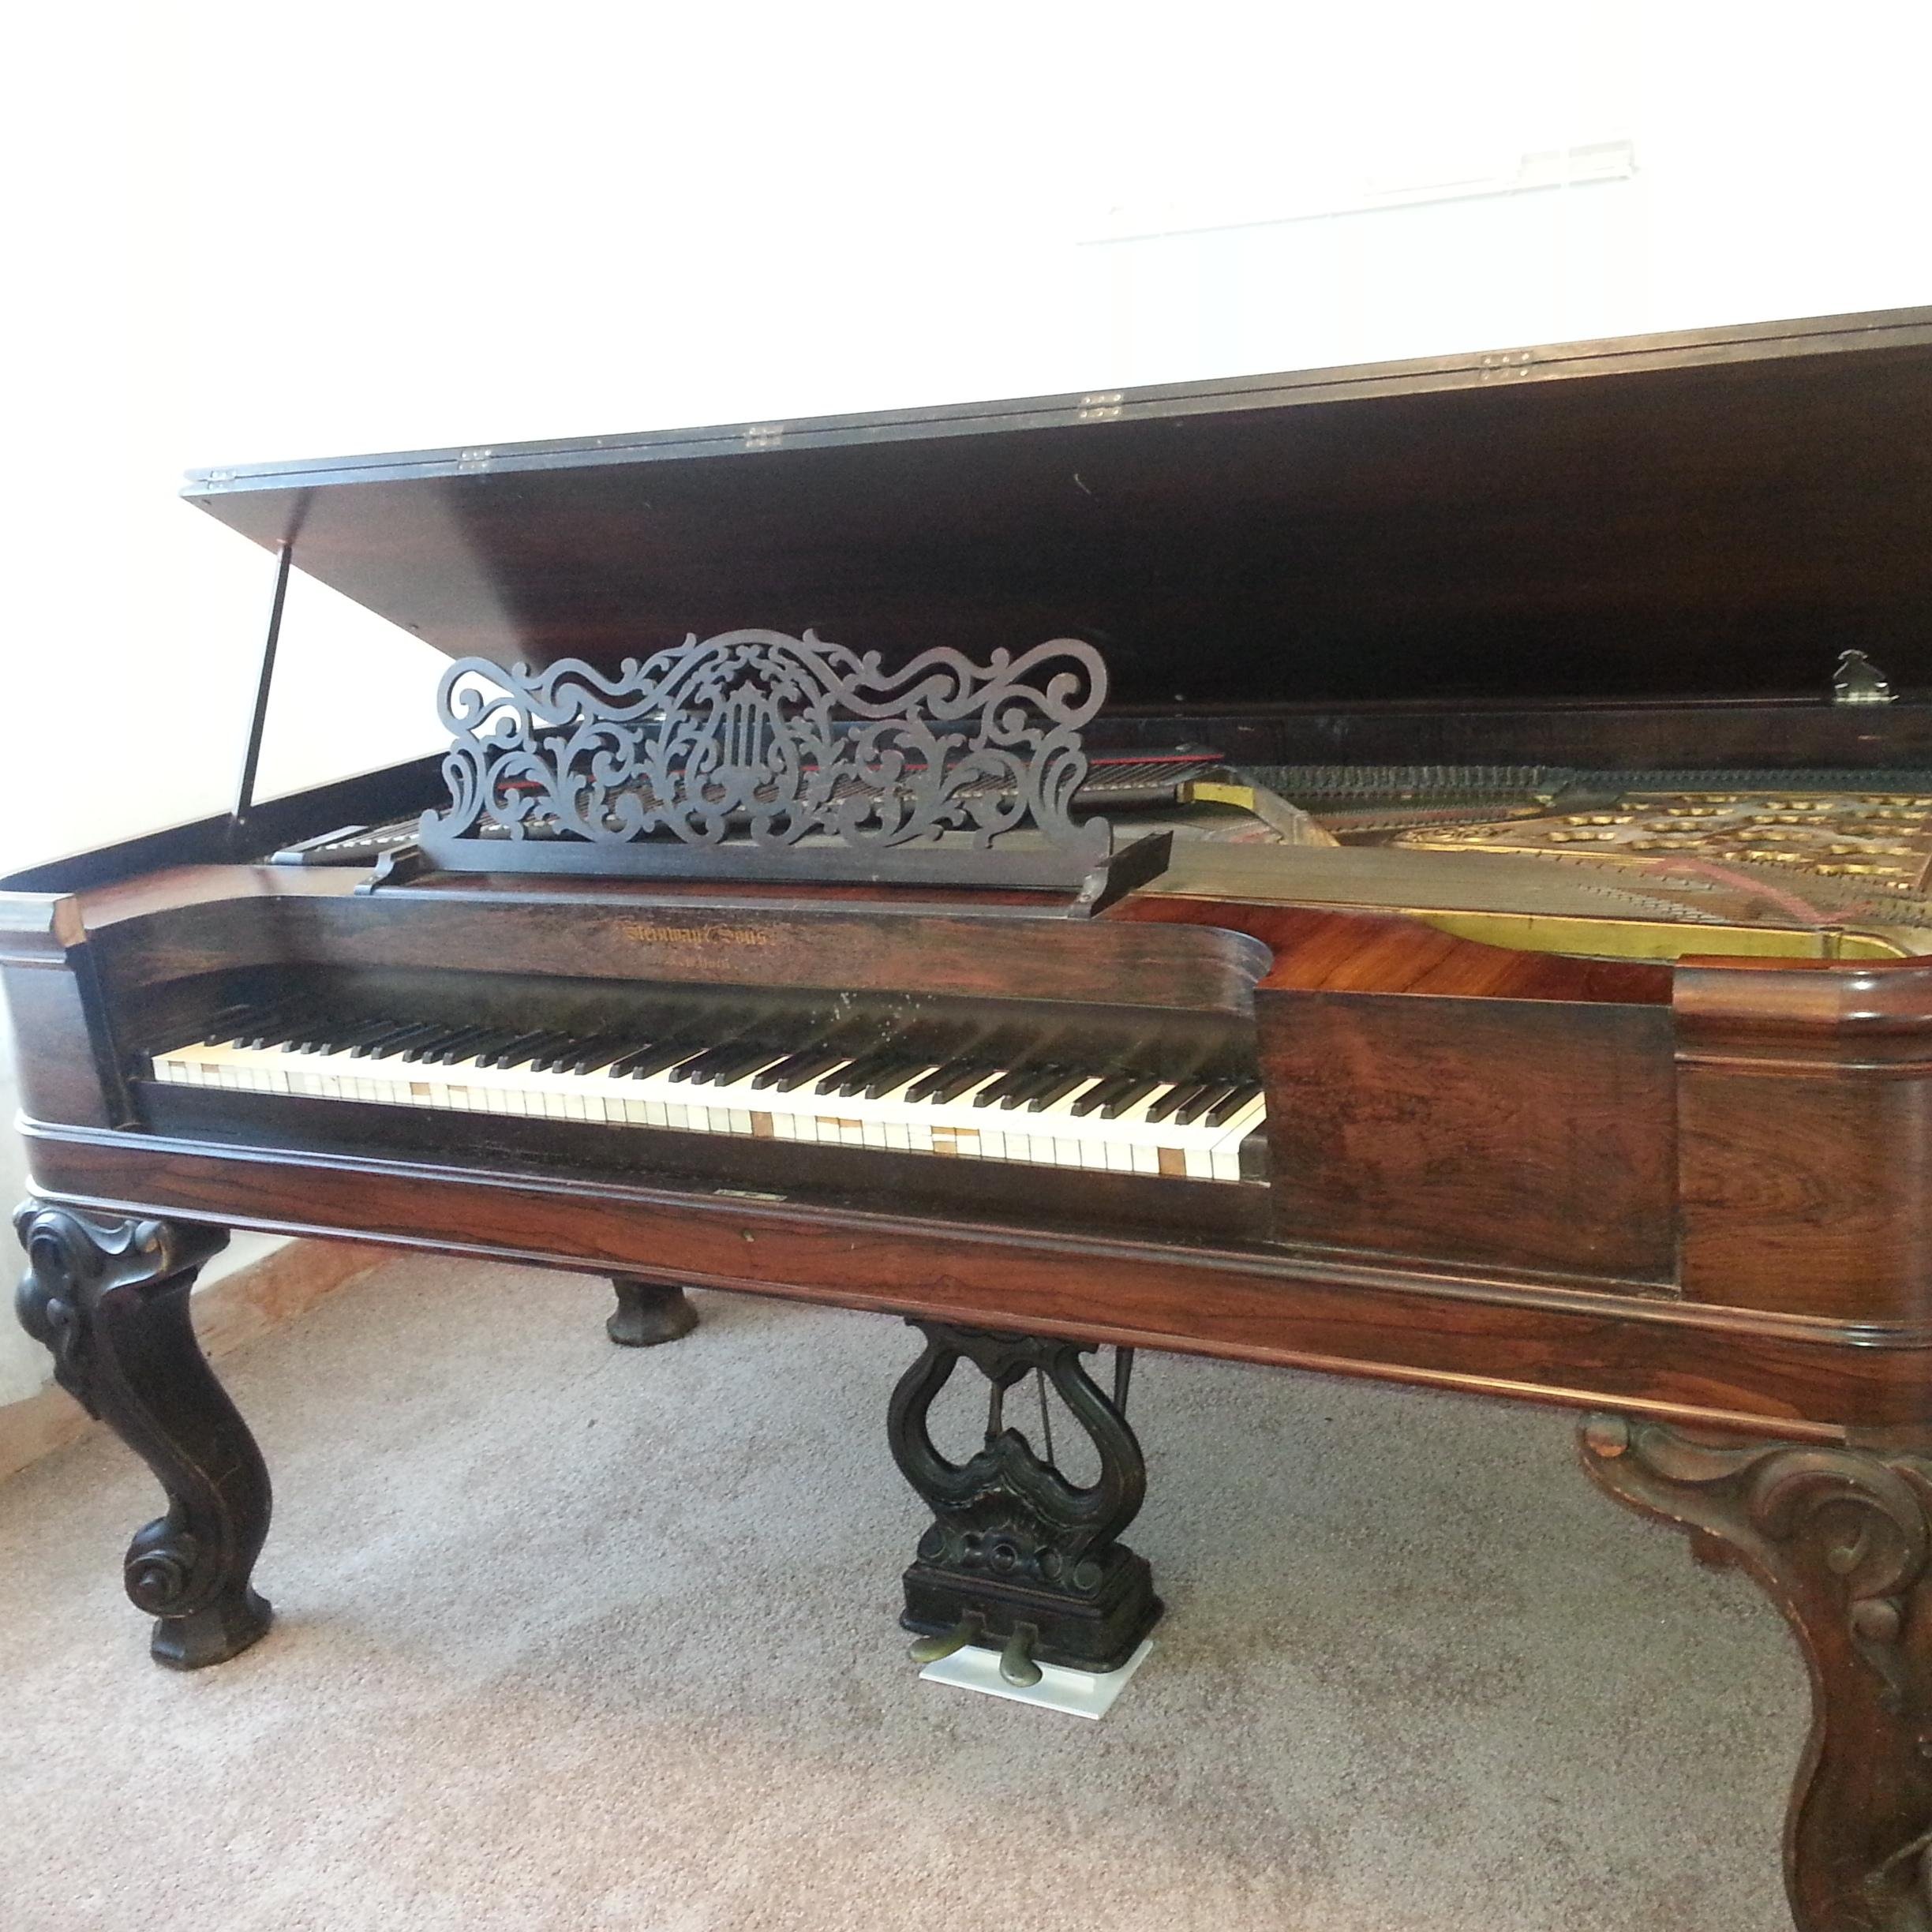 I'm an 1872 #Steinway & Sons Square Grand #Piano. My days are filled with #music & art and I hope to one day be fully restored!